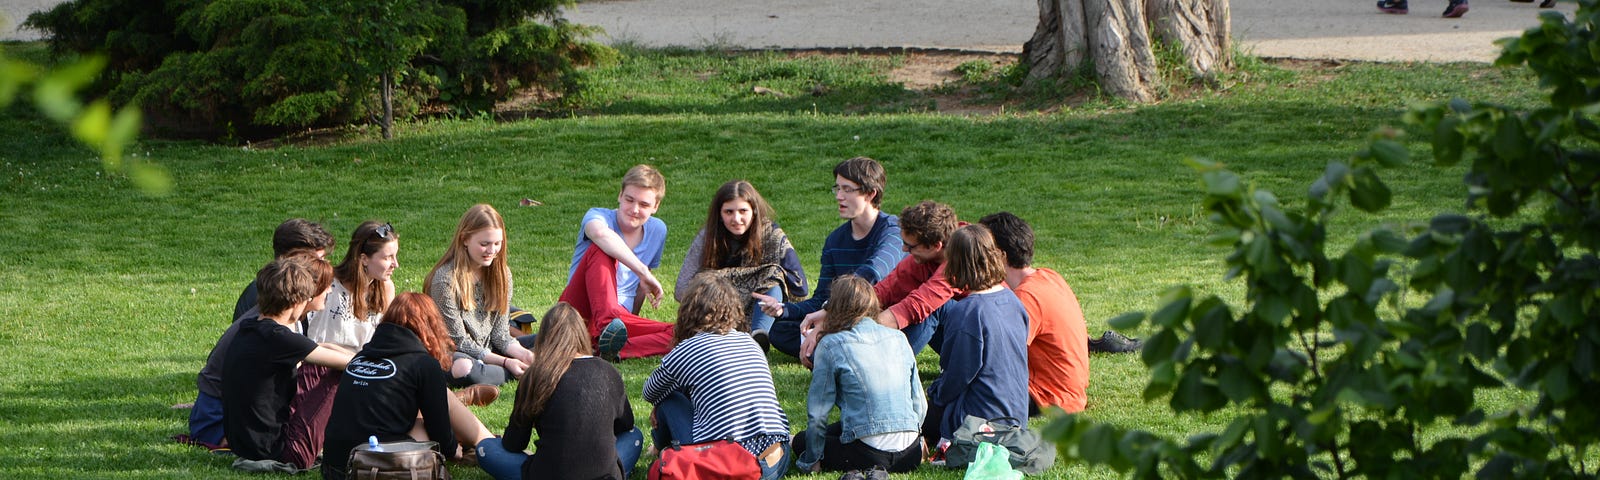 A group of about 14 people sit outside on bright green grass.